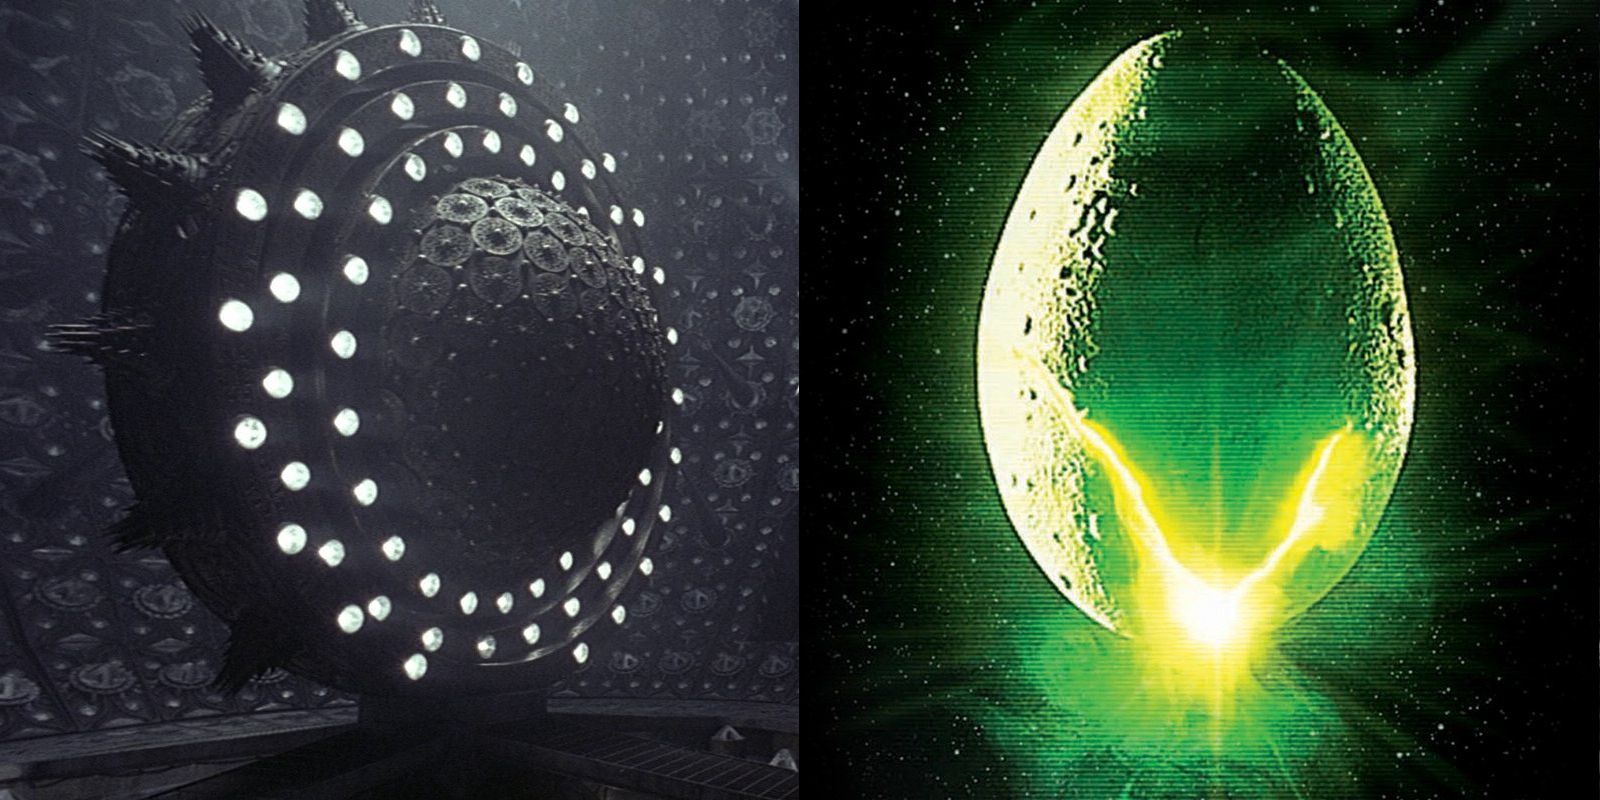 The sphere from Event Horizon and the egg from Alien.